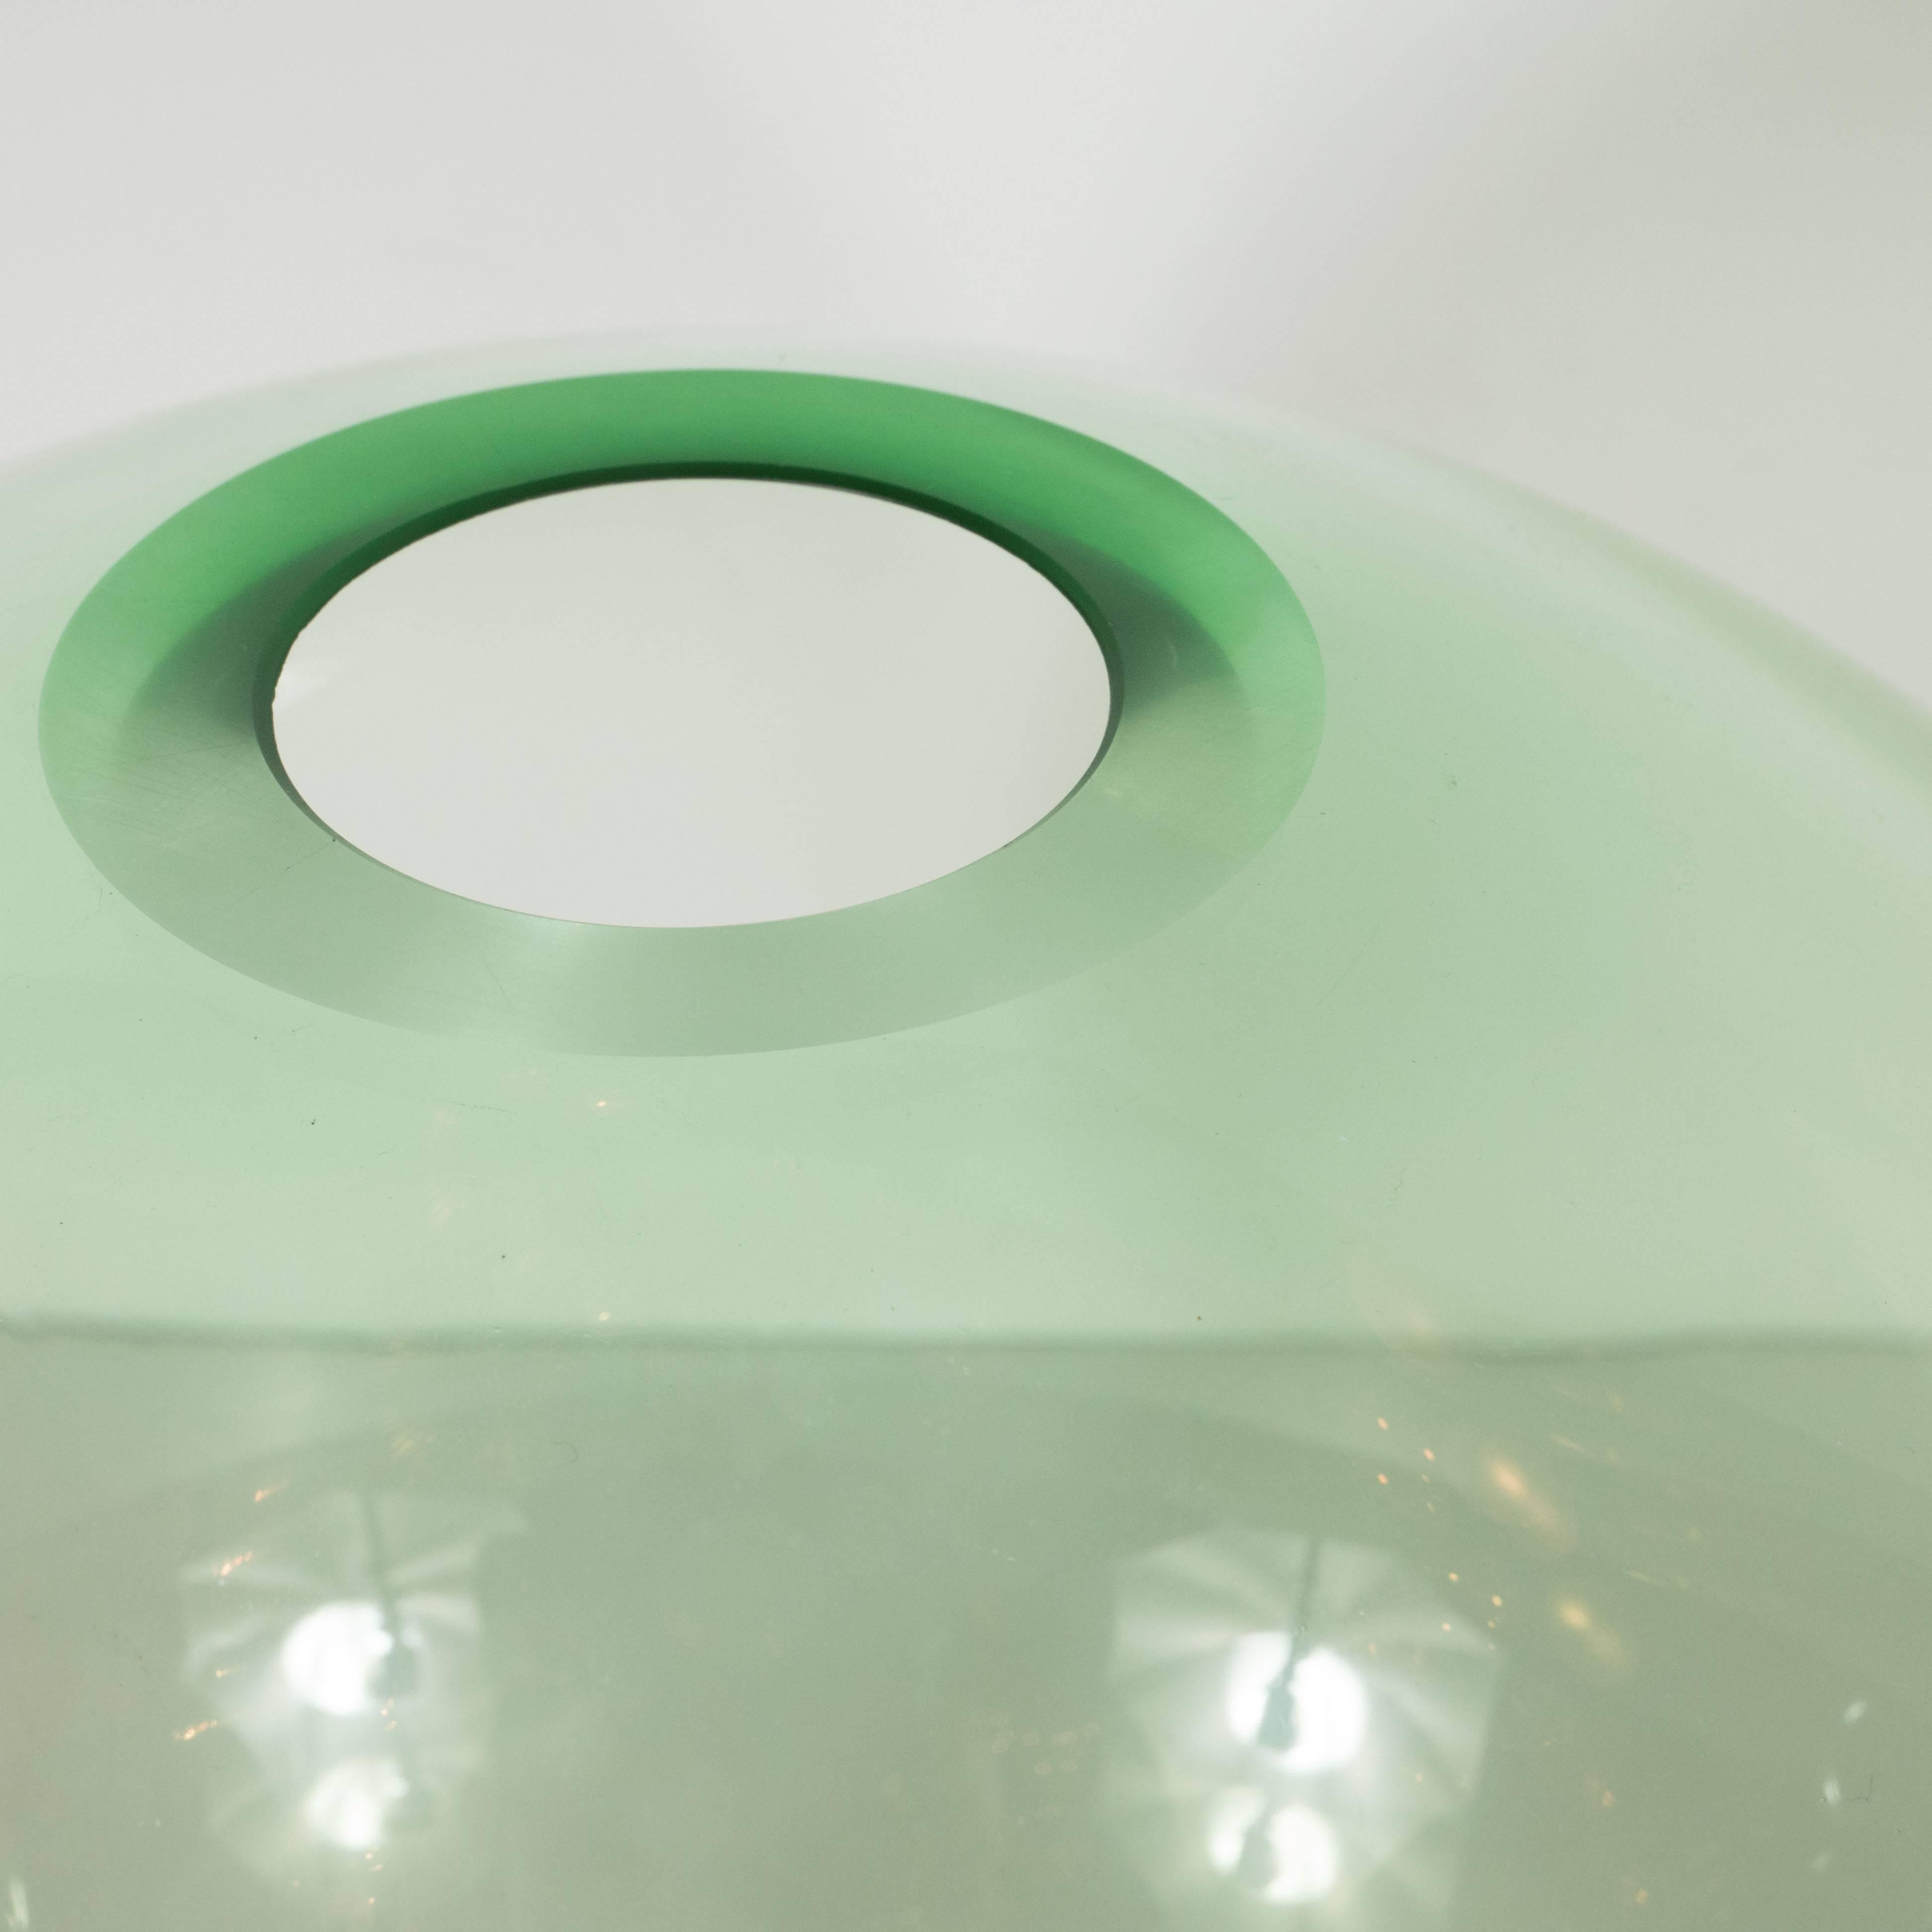 American Pair of Modernist Globular Vases in Translucent Emerald Green by Nick Leonoff For Sale